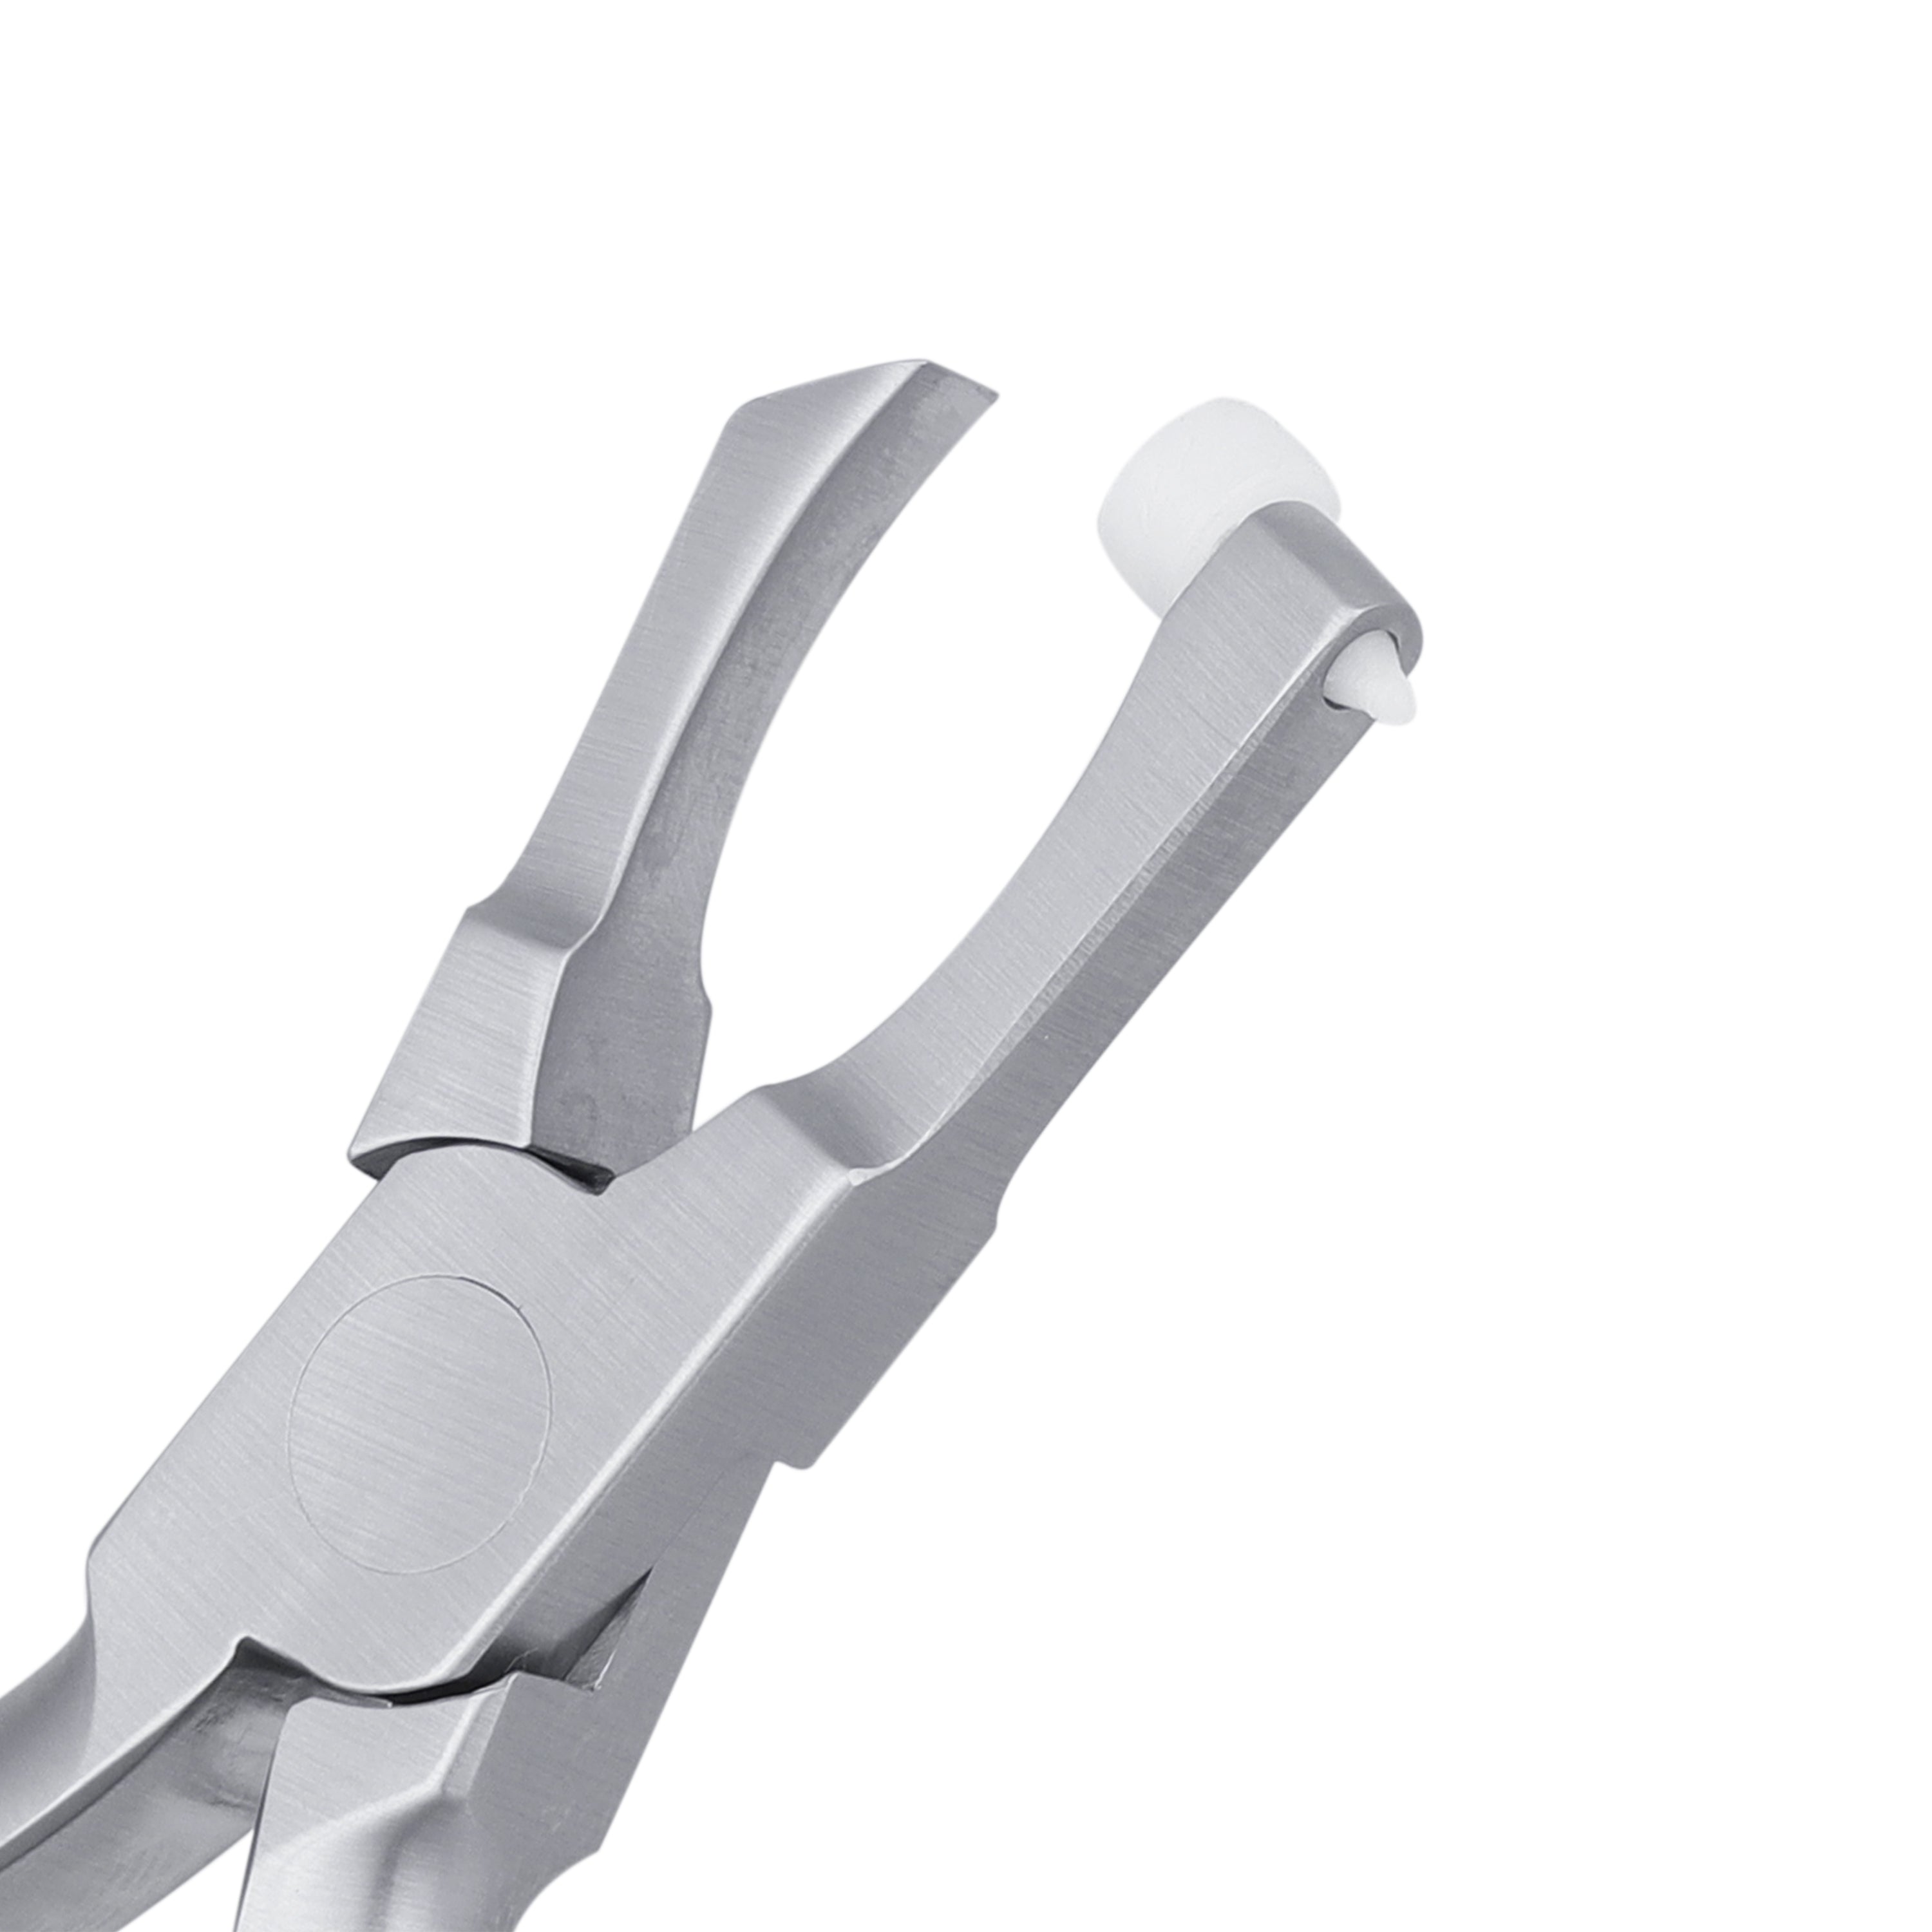 Posterior Band Removing Pliers, Long - HiTeck Medical Instruments